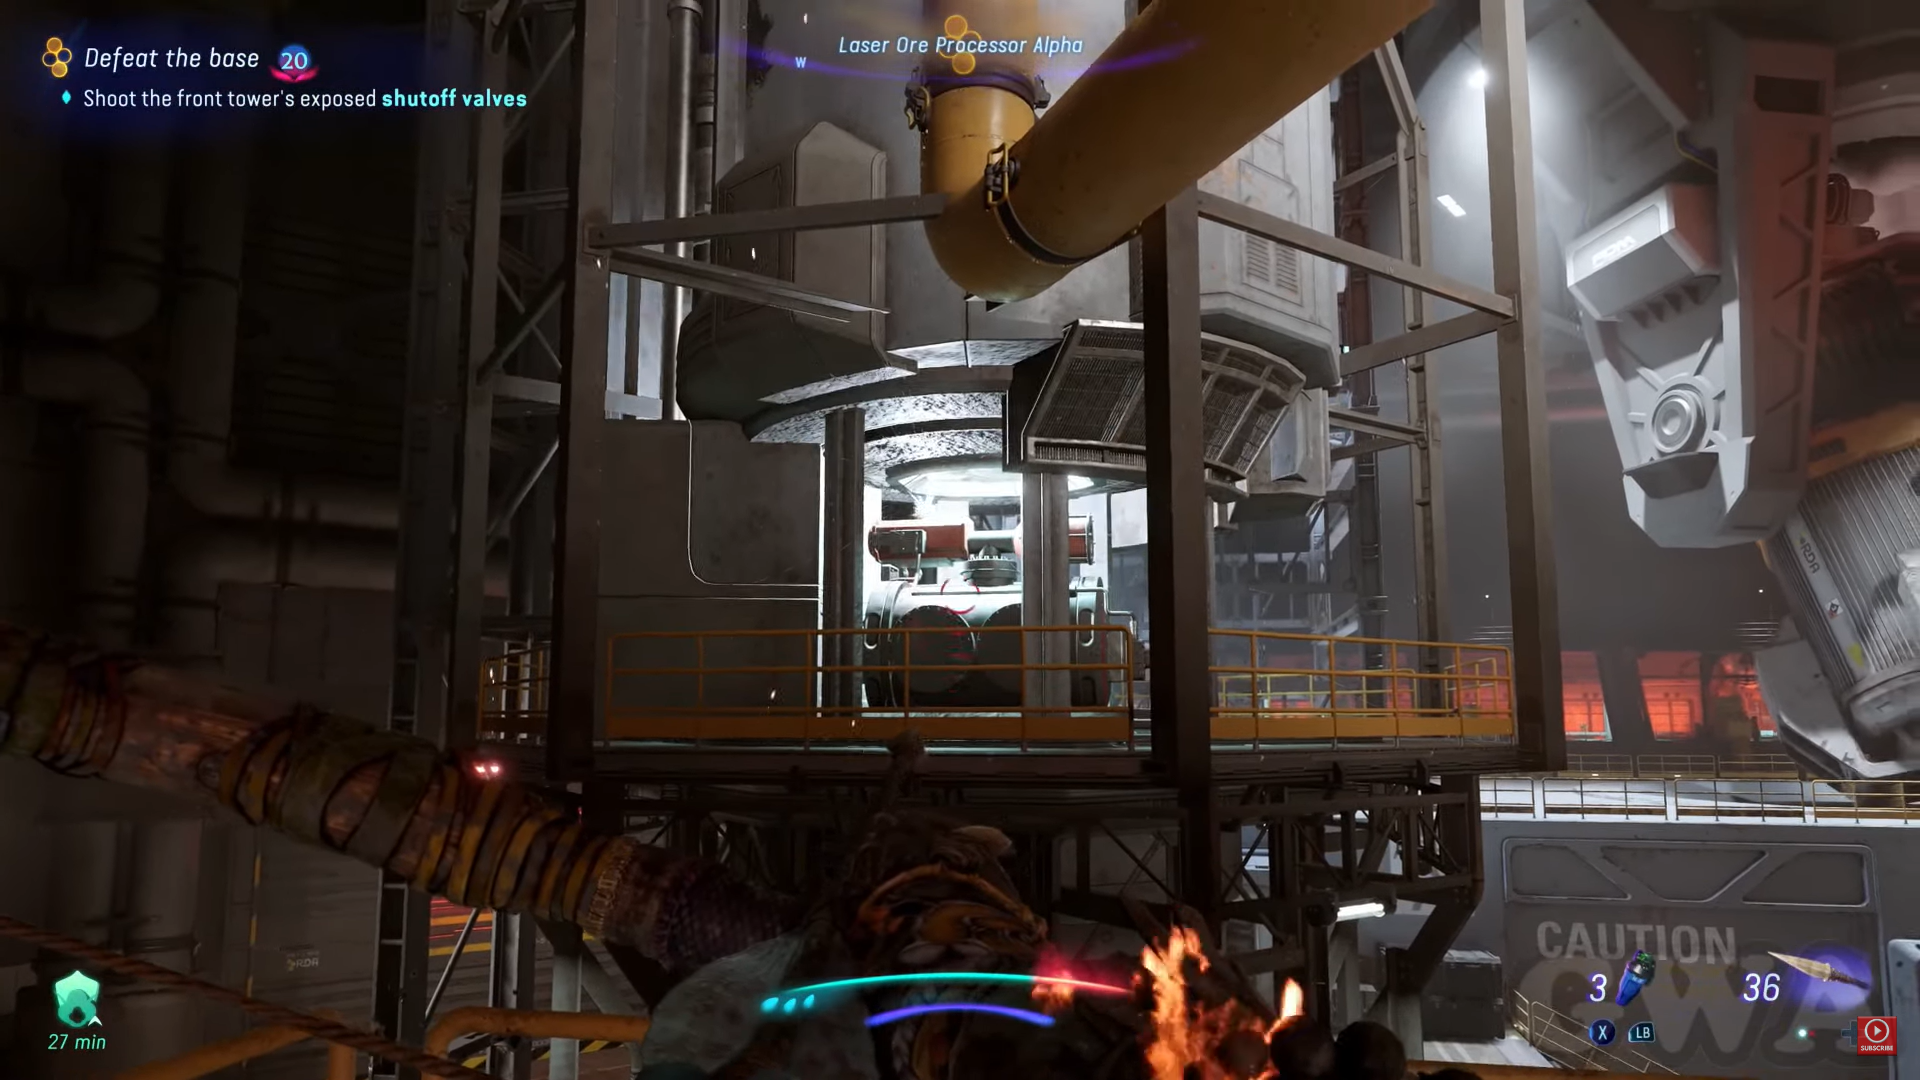 A screenshot of the exposed shutoff valves on the front tower in Avatar: Frontiers of Pandora. 